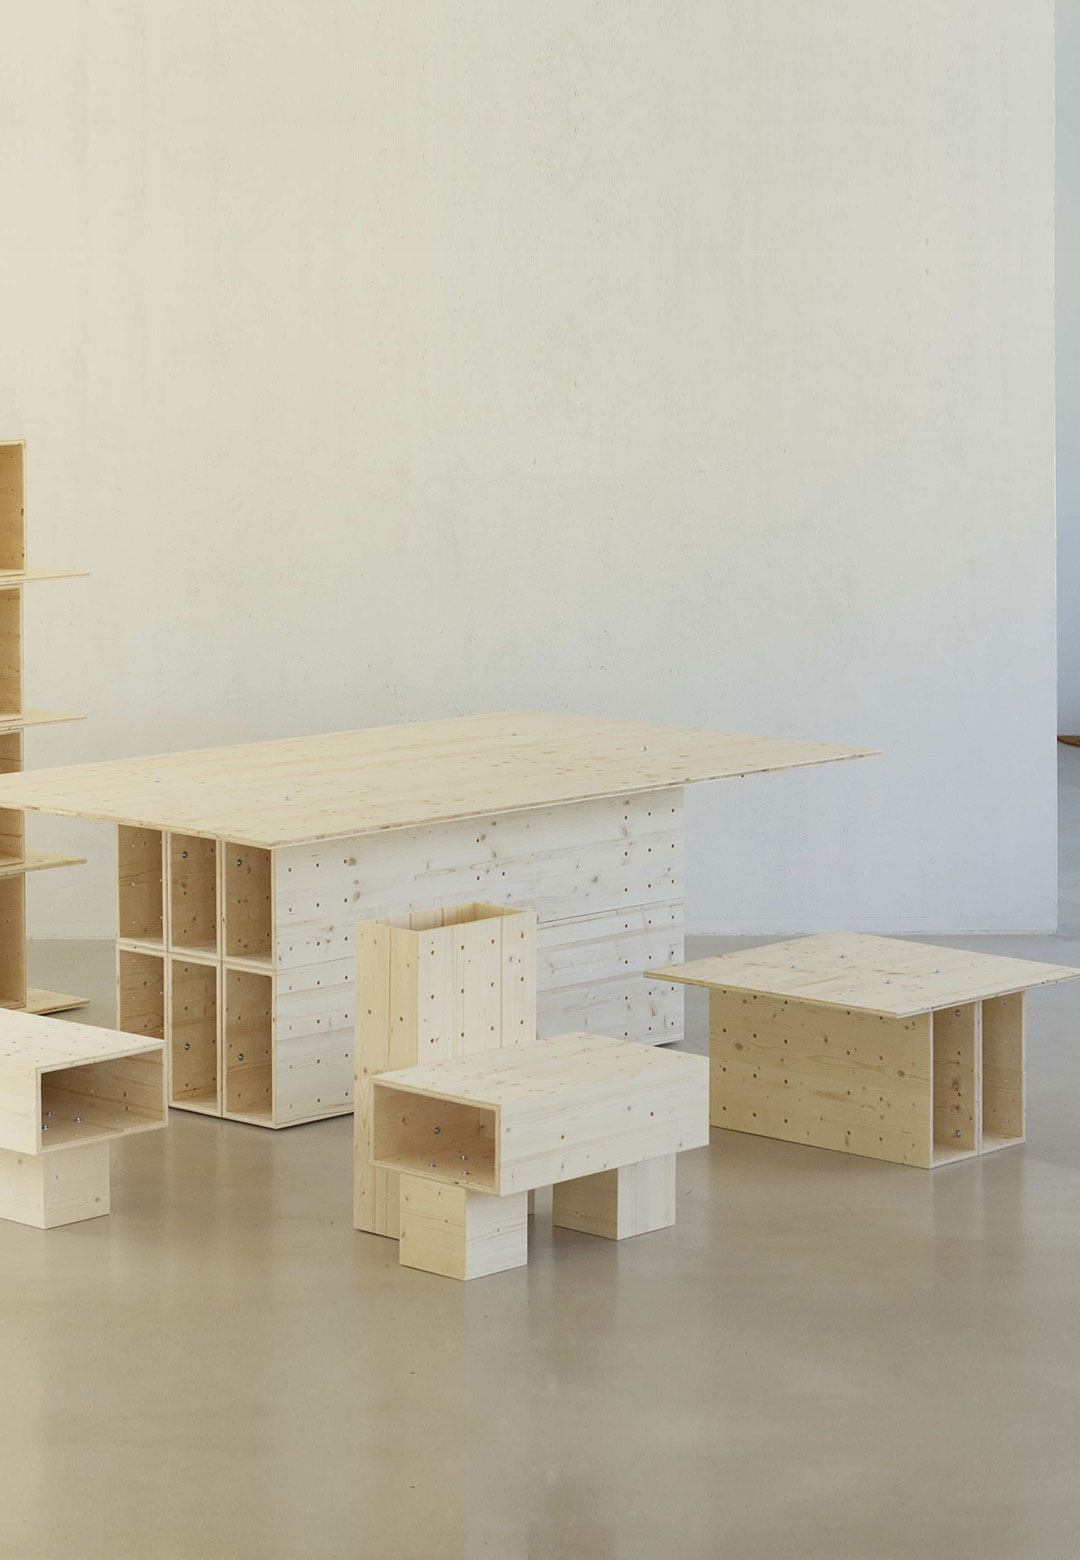 Haus Otto’s Workshop collection fuses modular furniture with signage system